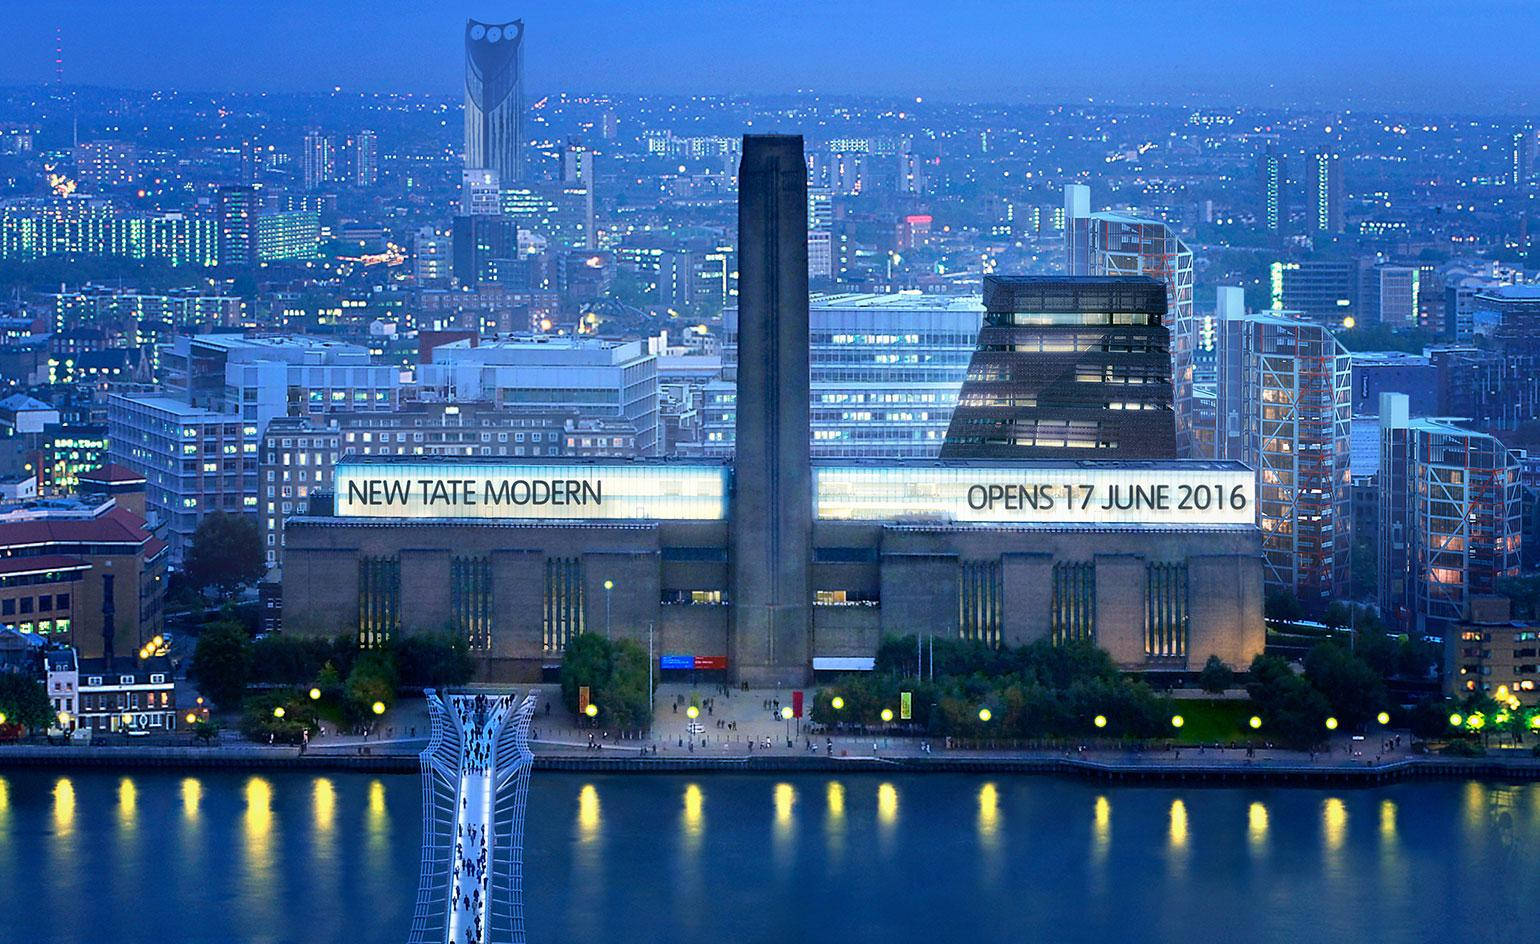 New Tate Modern At Night Picture